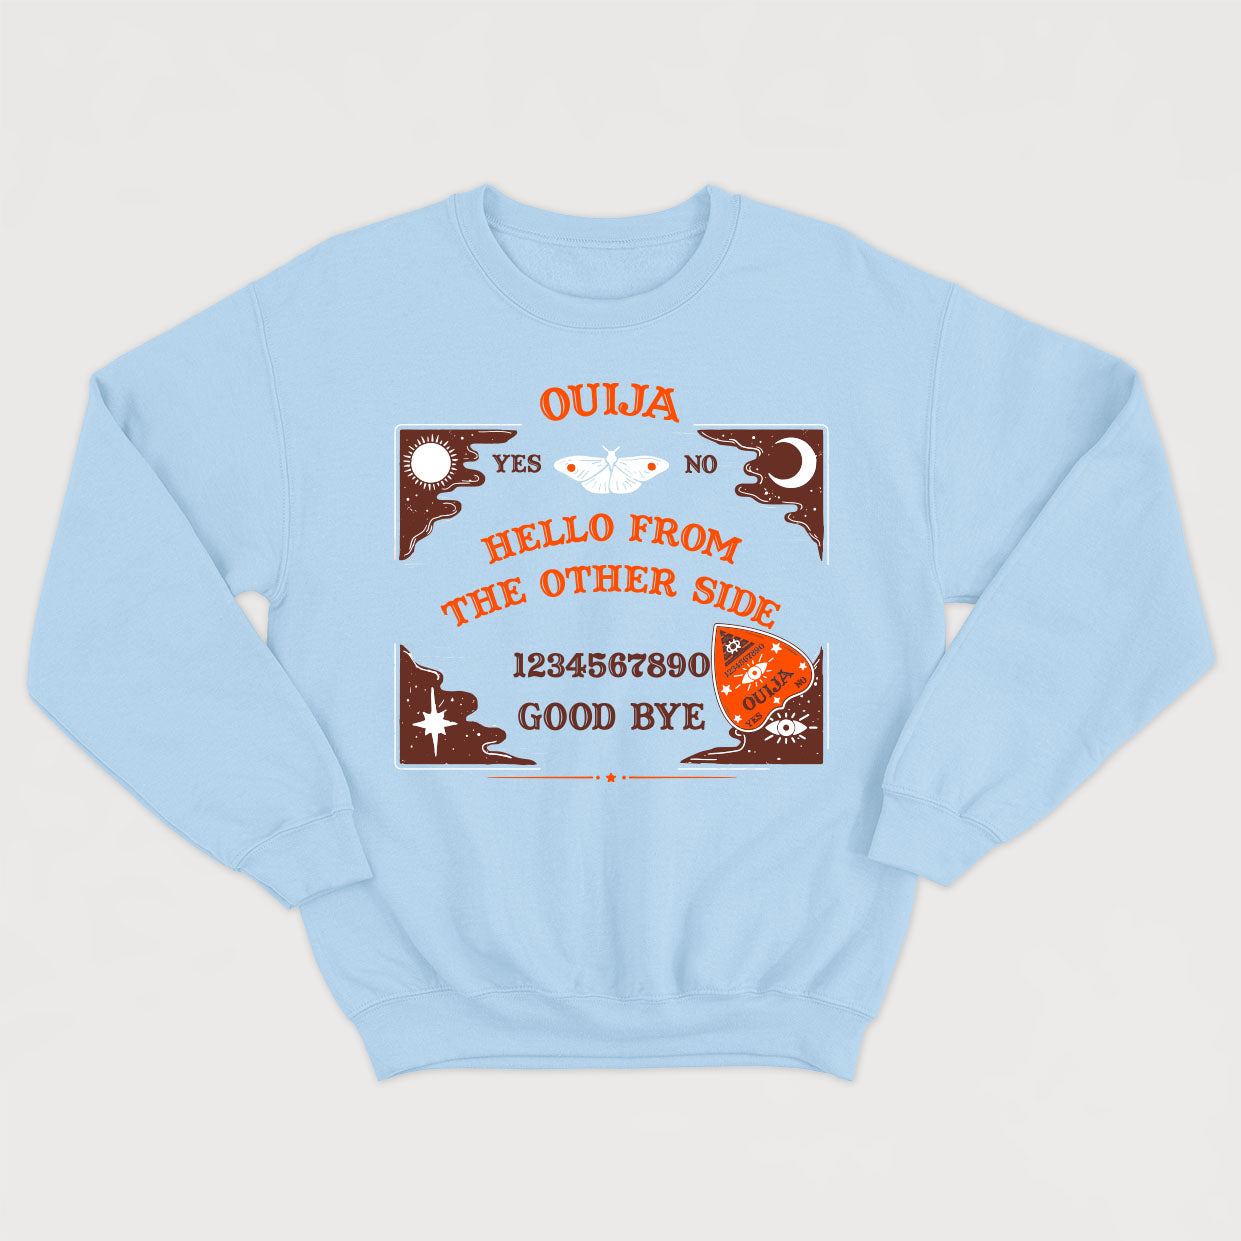 OUIJA : Hello from the other side - crewneck unisexe - tamelo boutique